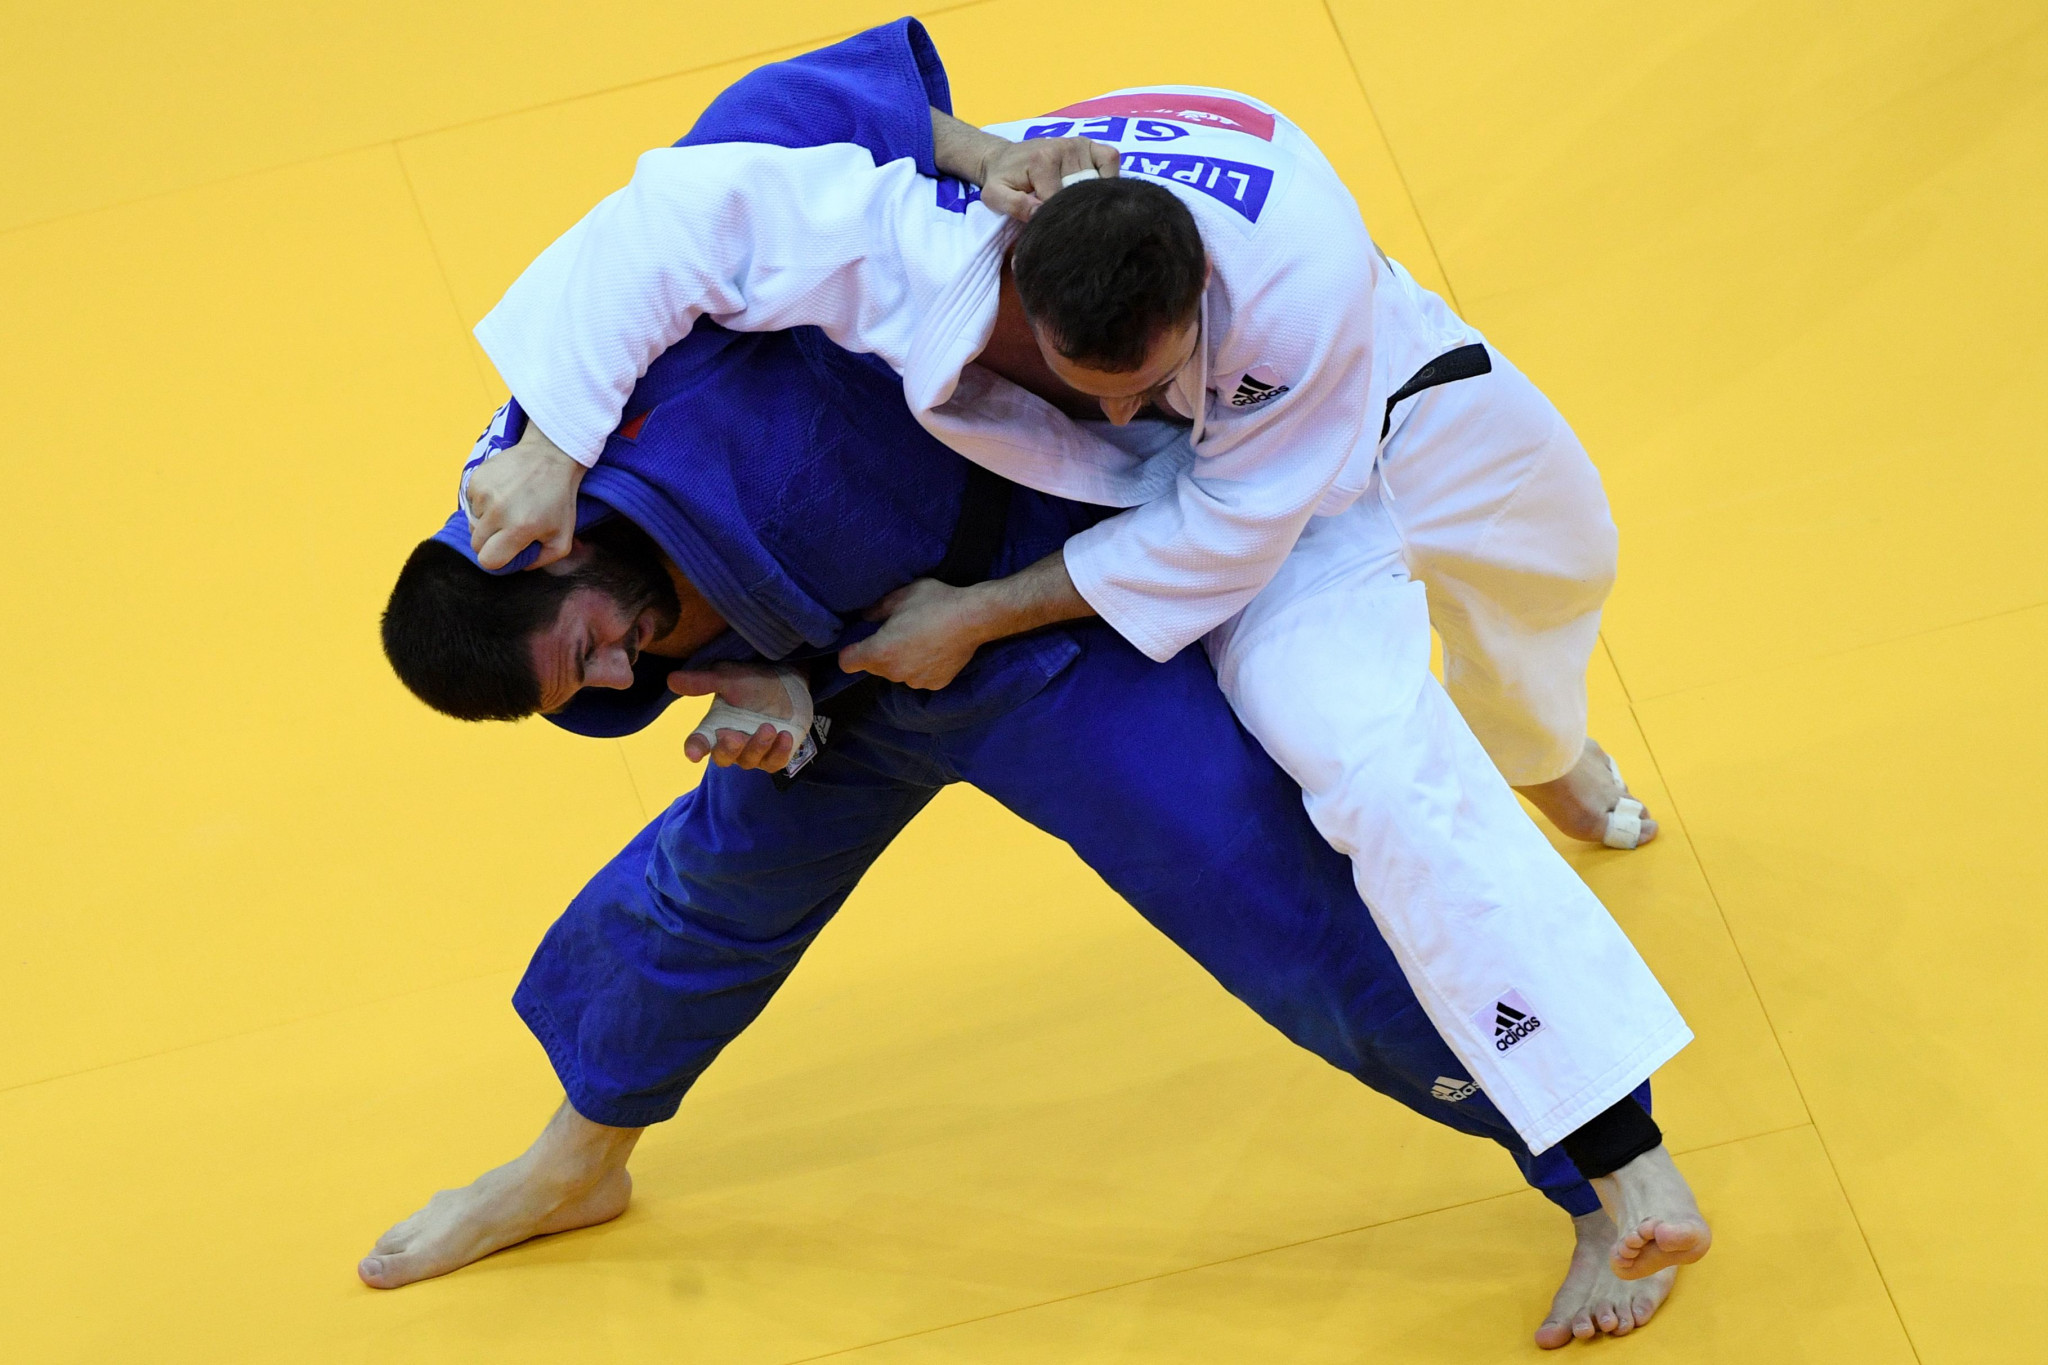 Russia's Arman Adamian stunned Georgia's Varlam Liparteliani to win the men's under-100kg final ©Getty Images